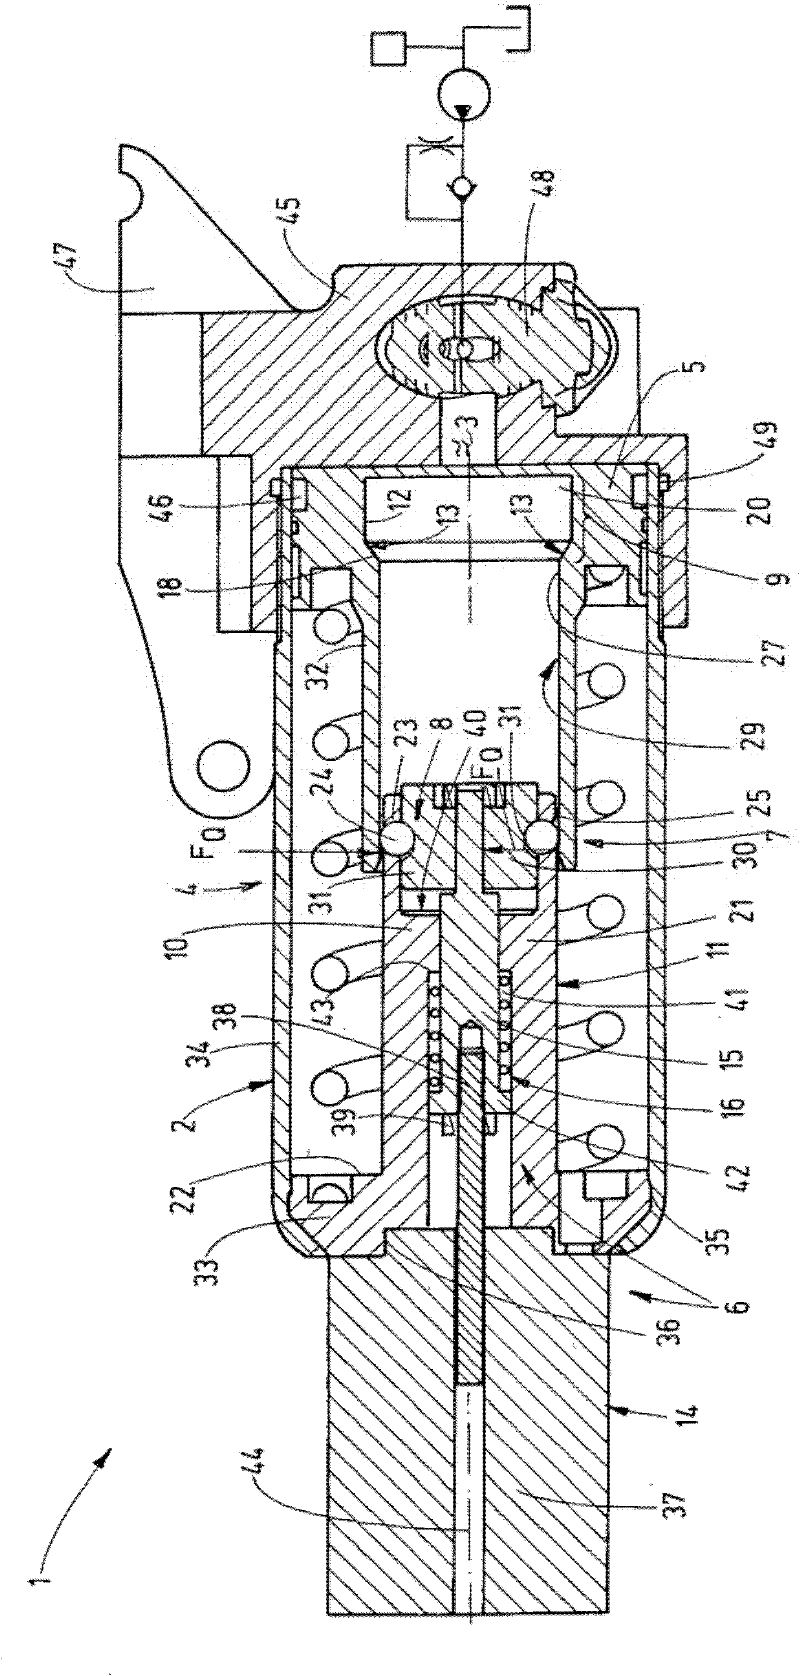 Device for the pulsed release of an amount of fluid which can be stored in an accumulator housing